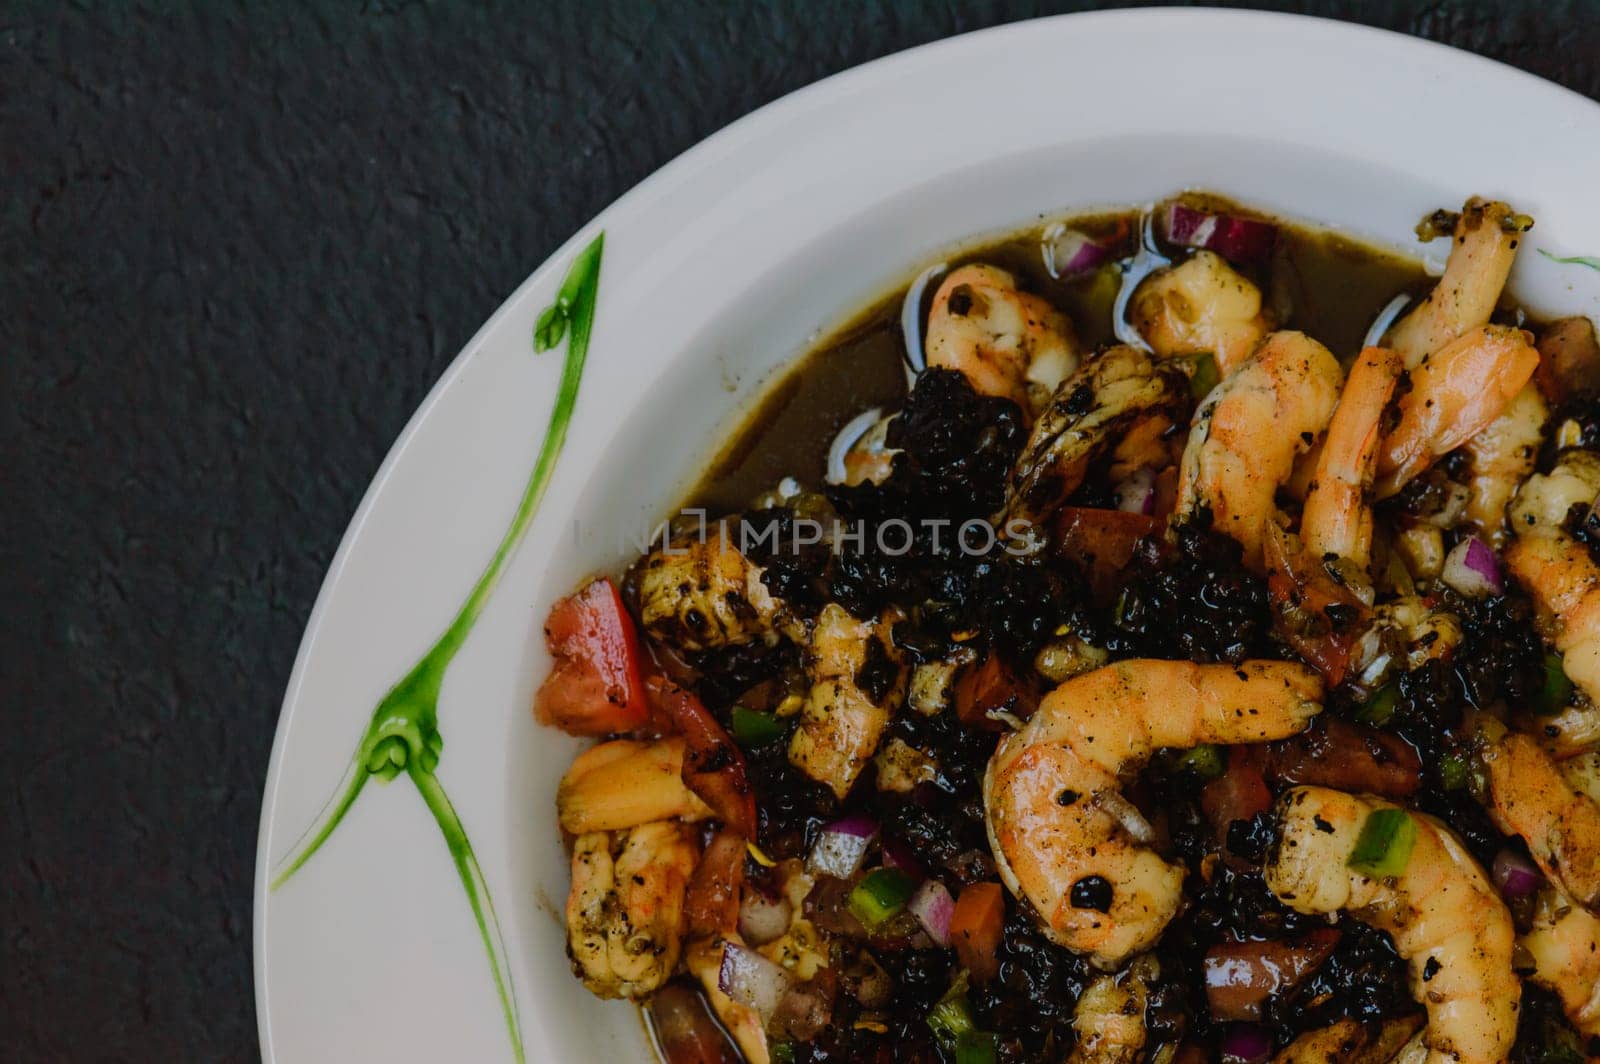 Black Shrimp Ceviche, Mexican Seafood Dish Made With Chili Ashes by RobertPB